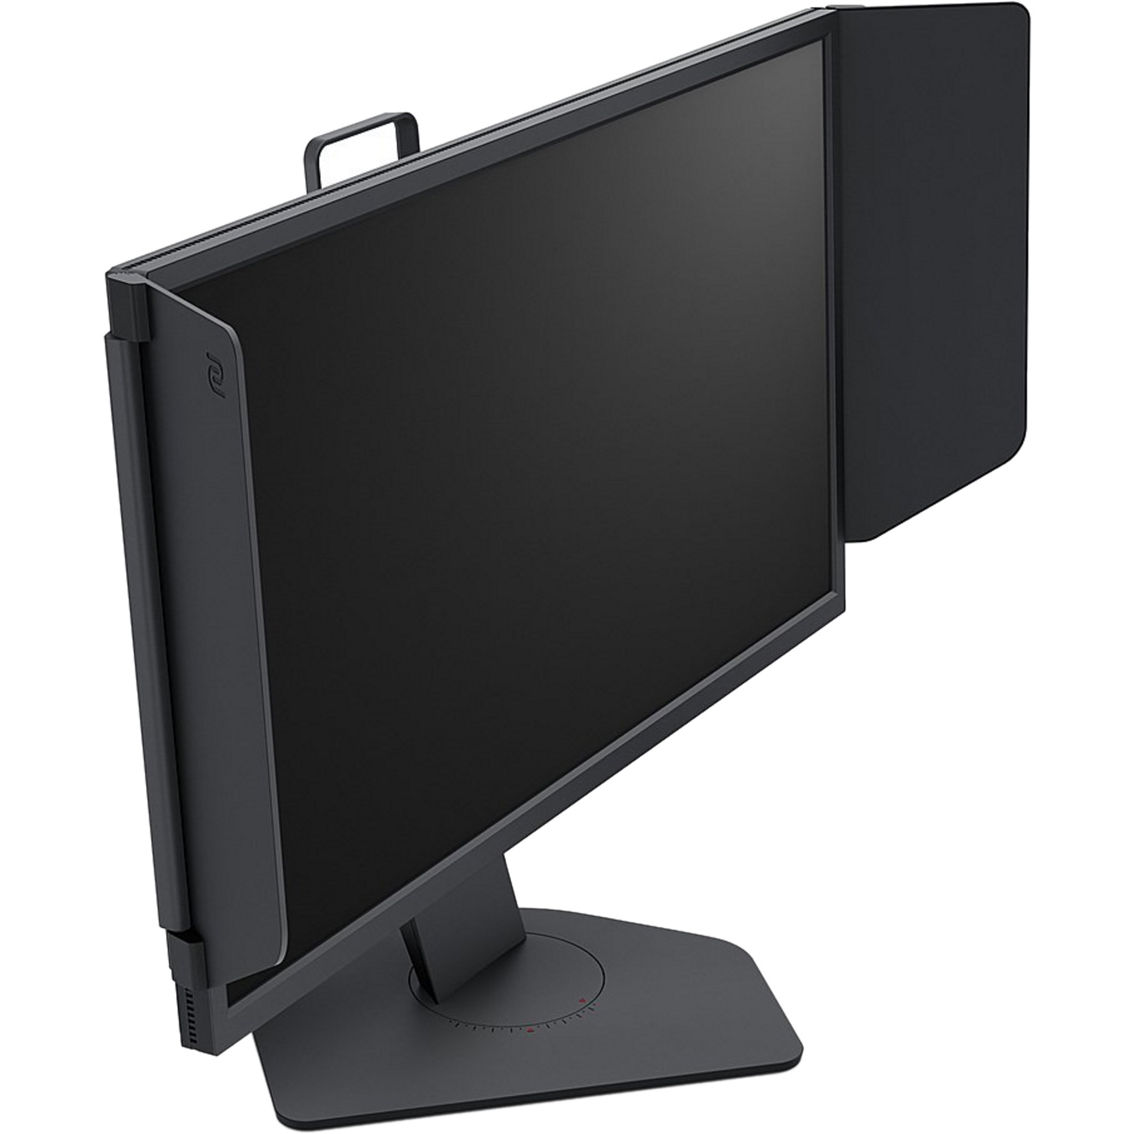 BenQ Zowie 24.5 in. 360Hz Gaming Monitor XL2566K - Image 4 of 6